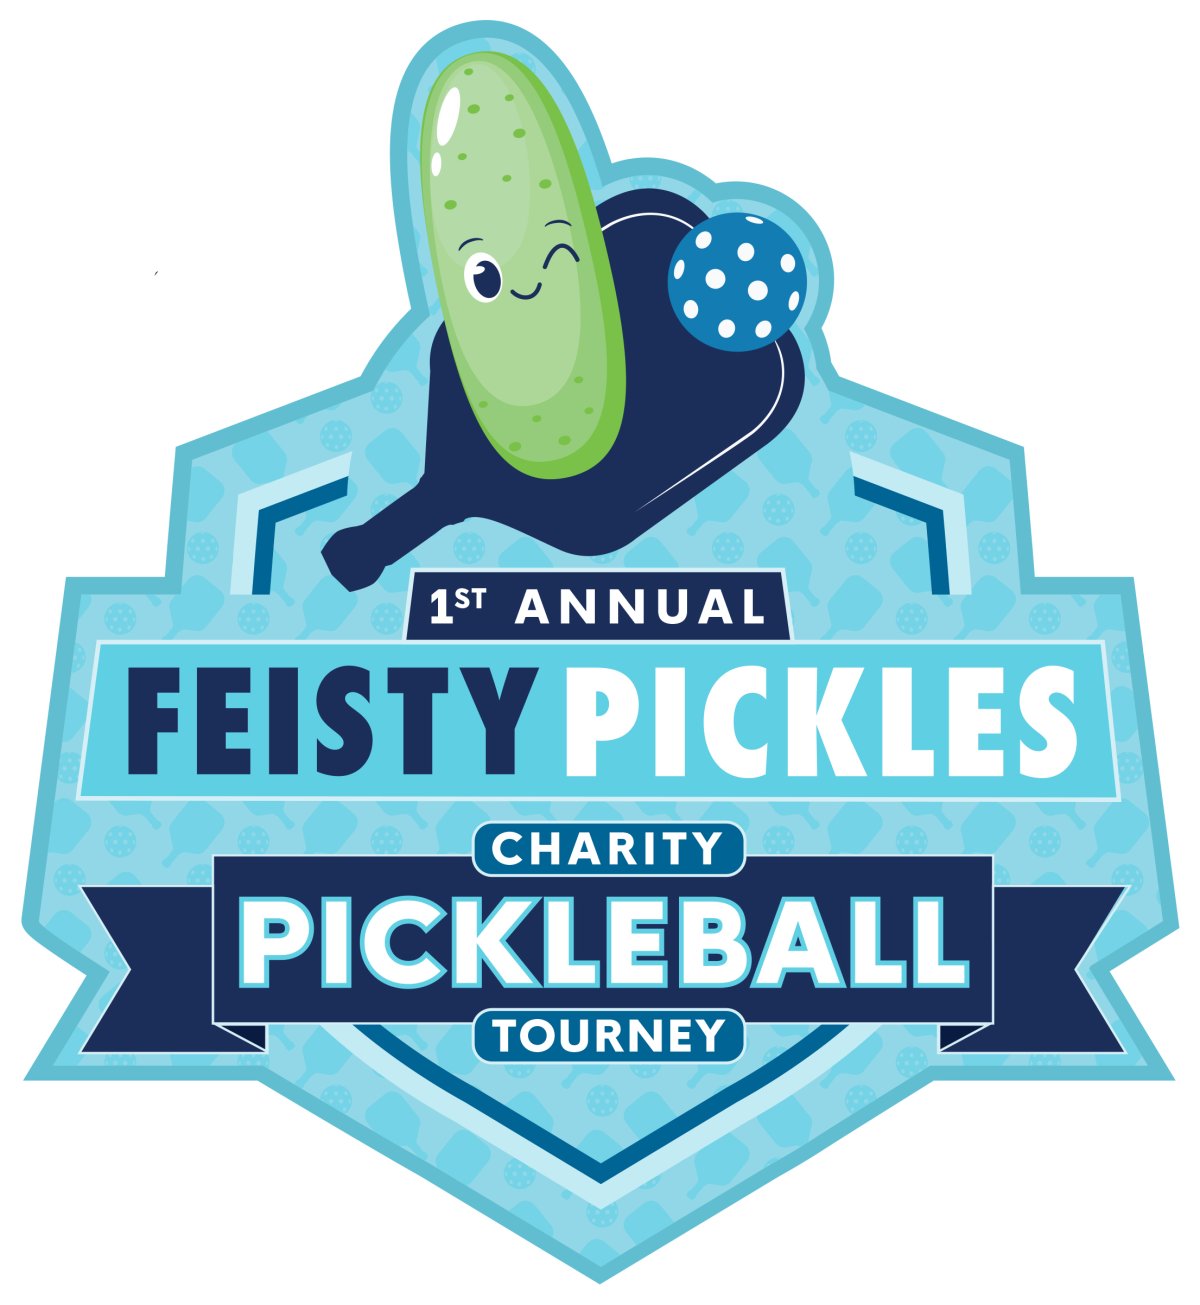 1st Annual Feisty Pickles Charity Pickleball Tournament - image